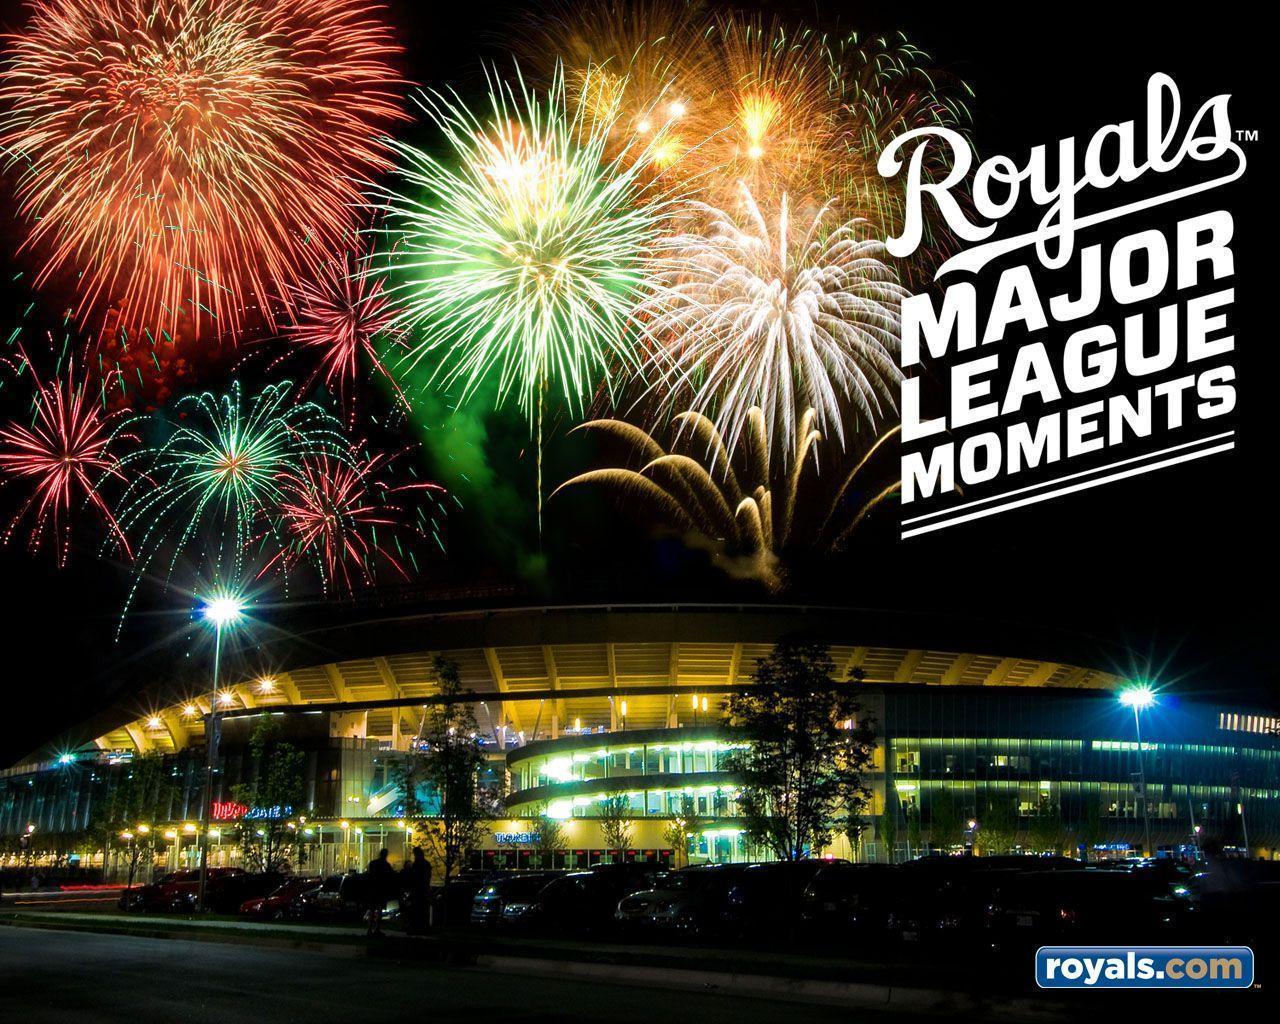 Kansas City Royals Wallpapers & Browser Themes to Get Pumped for